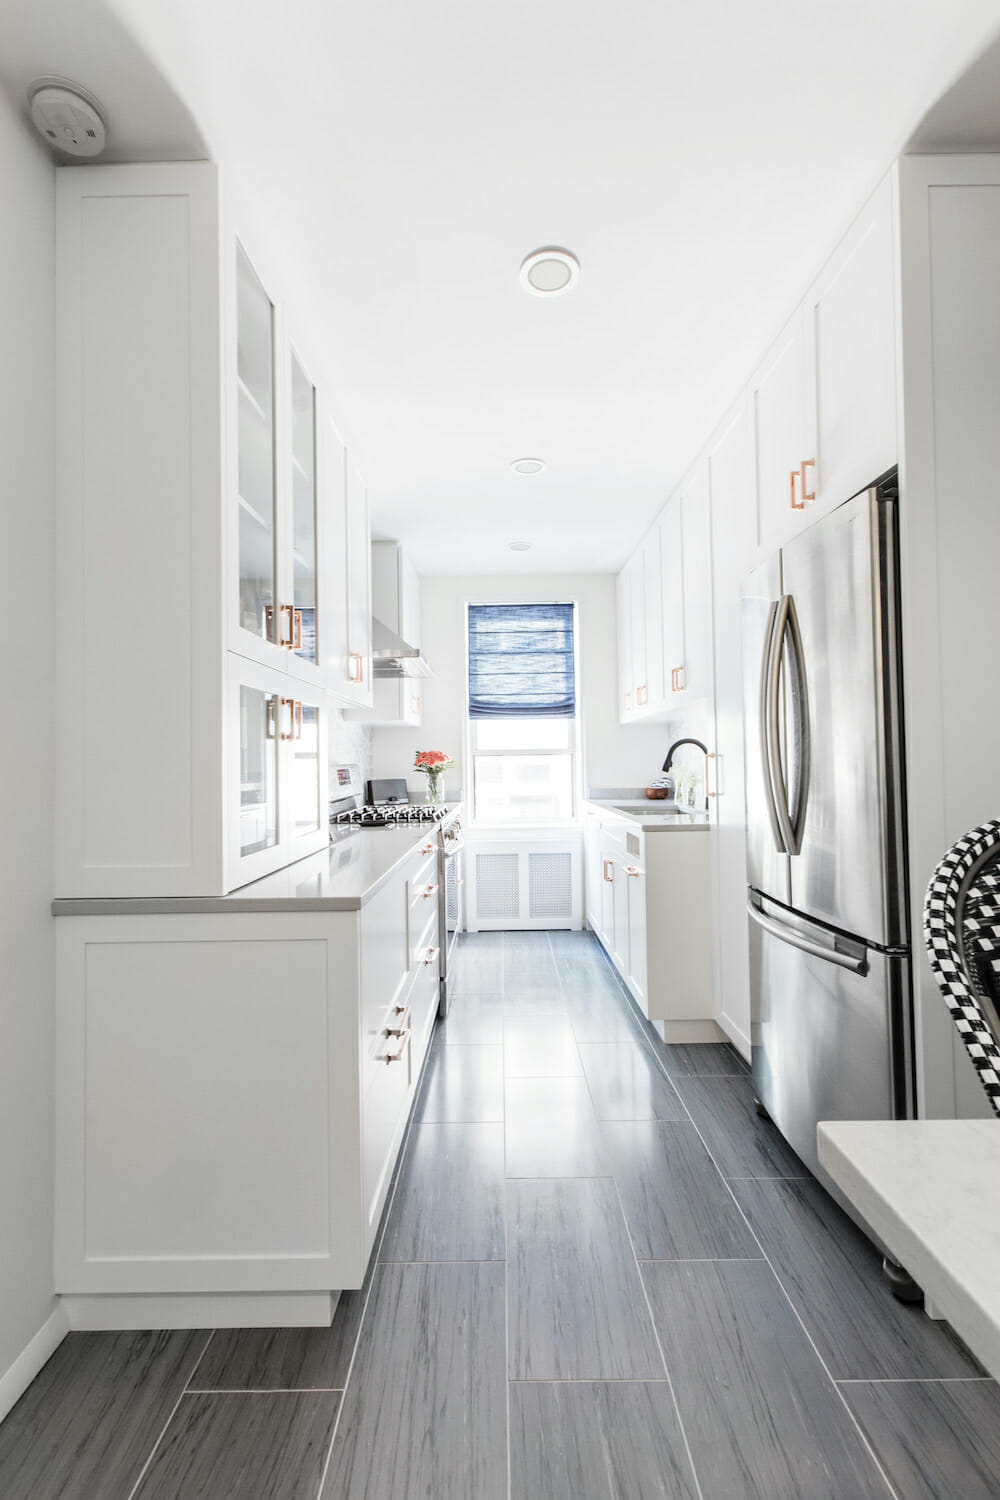 white kitchen cabinets with dark gray tile flooring and white paint on walls and flush mounted ceiling light after renovation